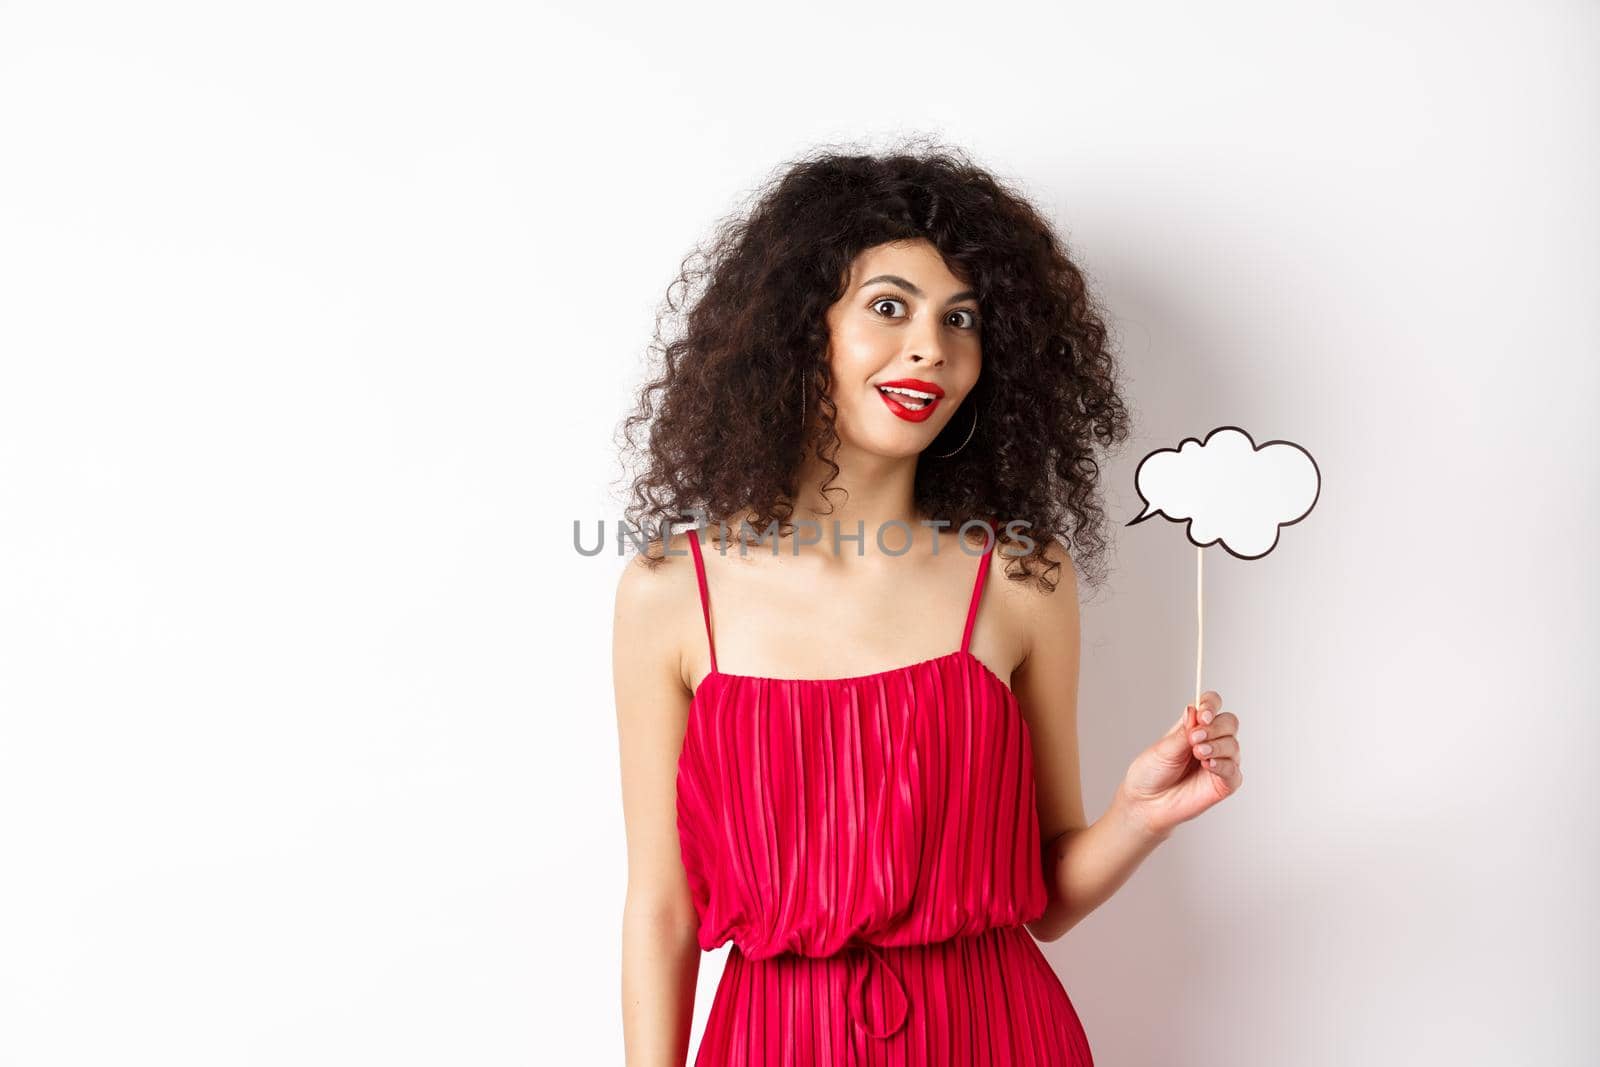 Beautiful woman with curly hair, wearing red dress, holding comment cloud, say something, standing on white background.